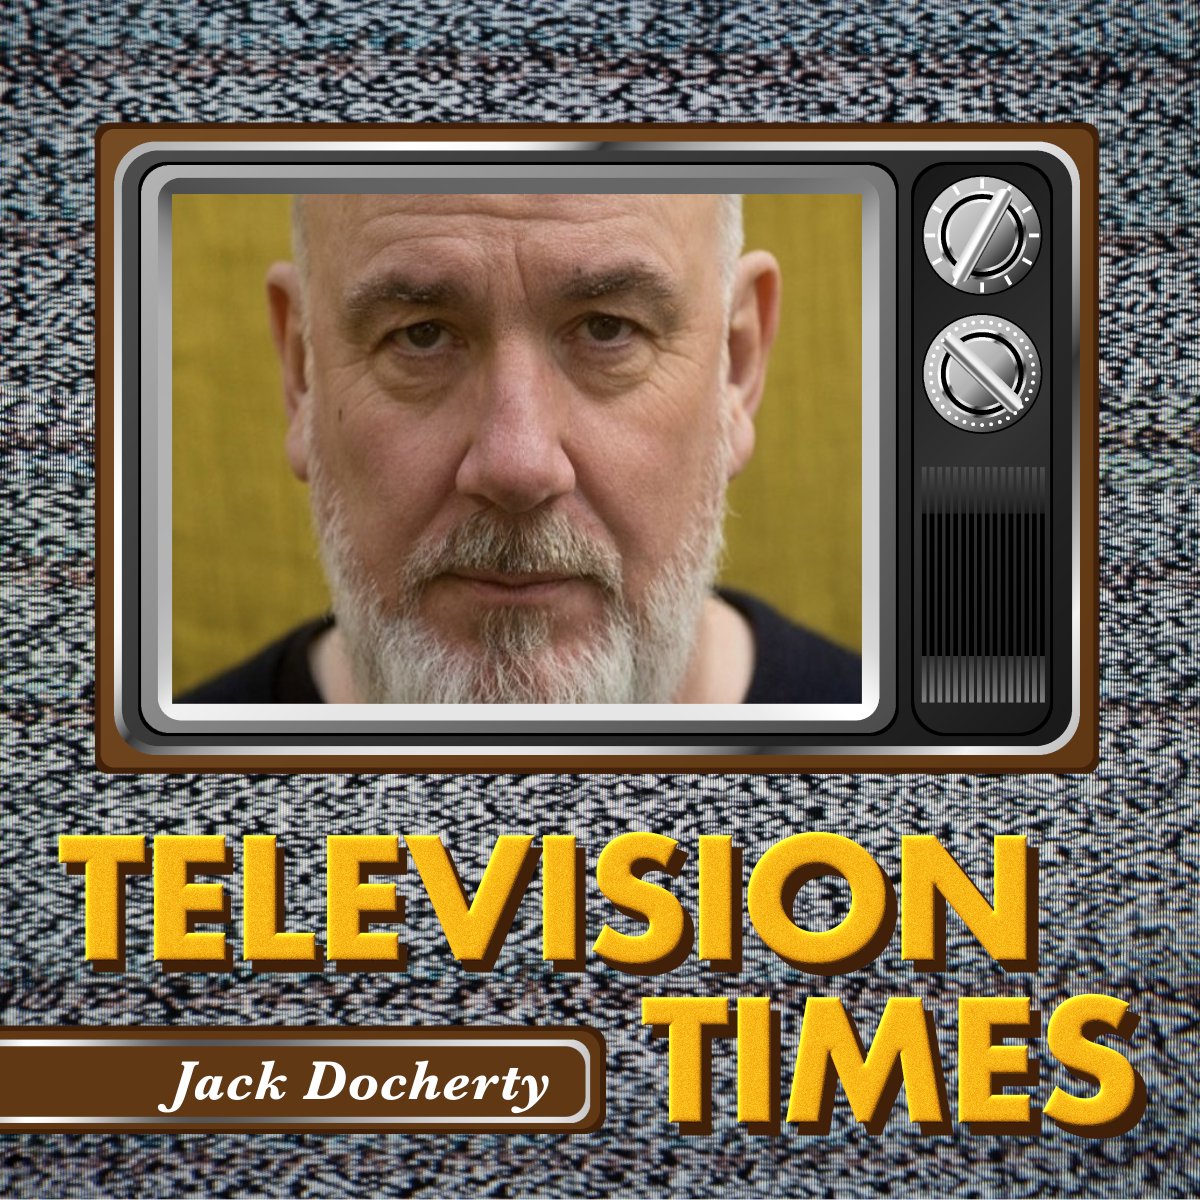 This week on @tvtimespod I chat to the comedy genius that is @mrjackdocherty and it's a perkins of an episode. #tv #chatshow #channel5 #90stv #podcast #edinburgh #absolutely #mrdonandmrgeorge #scotsquad #follow #explore #pickoftheday #funny @steveotisgunn